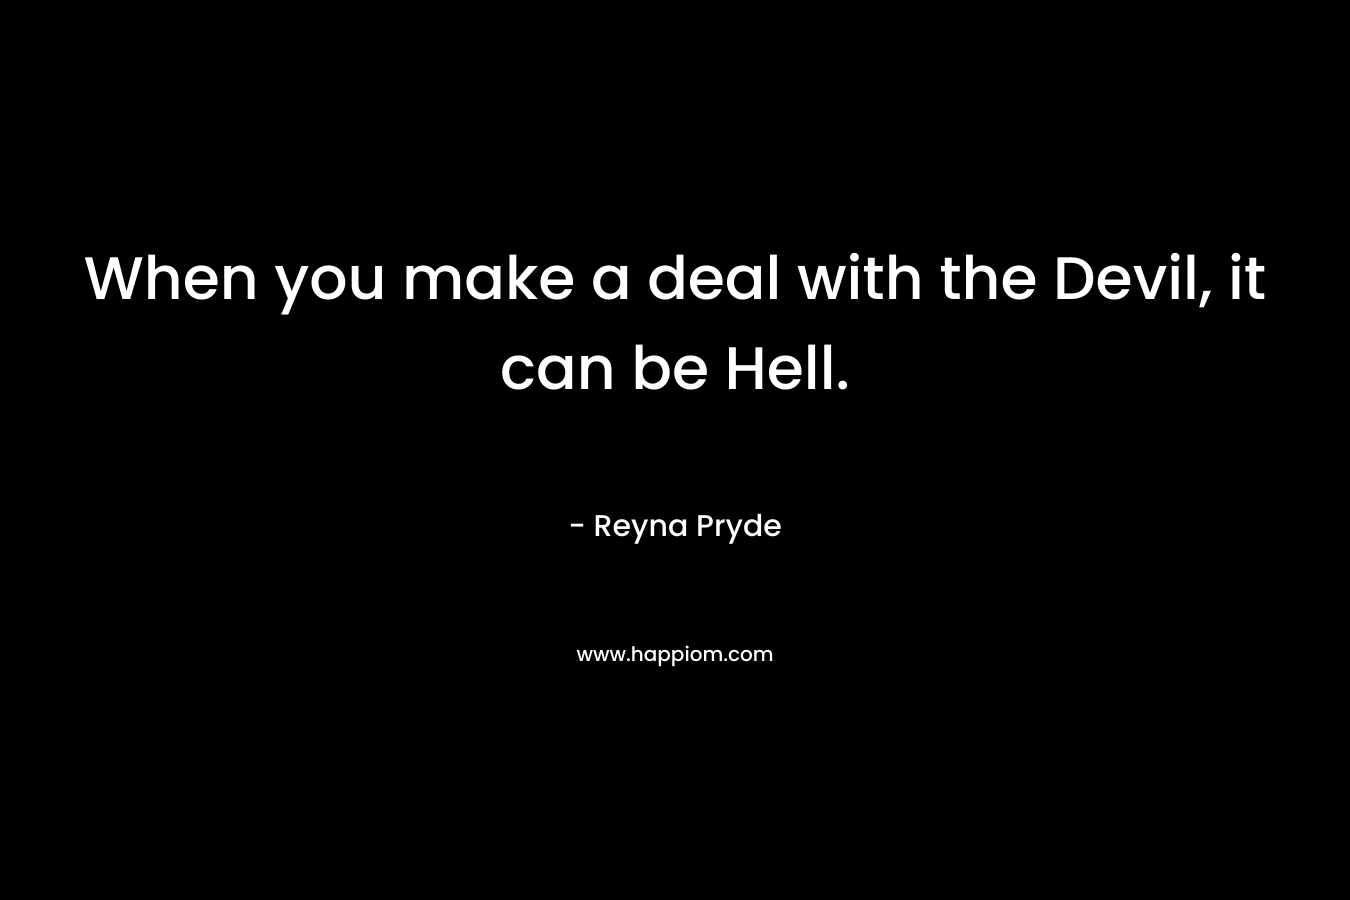 When you make a deal with the Devil, it can be Hell.